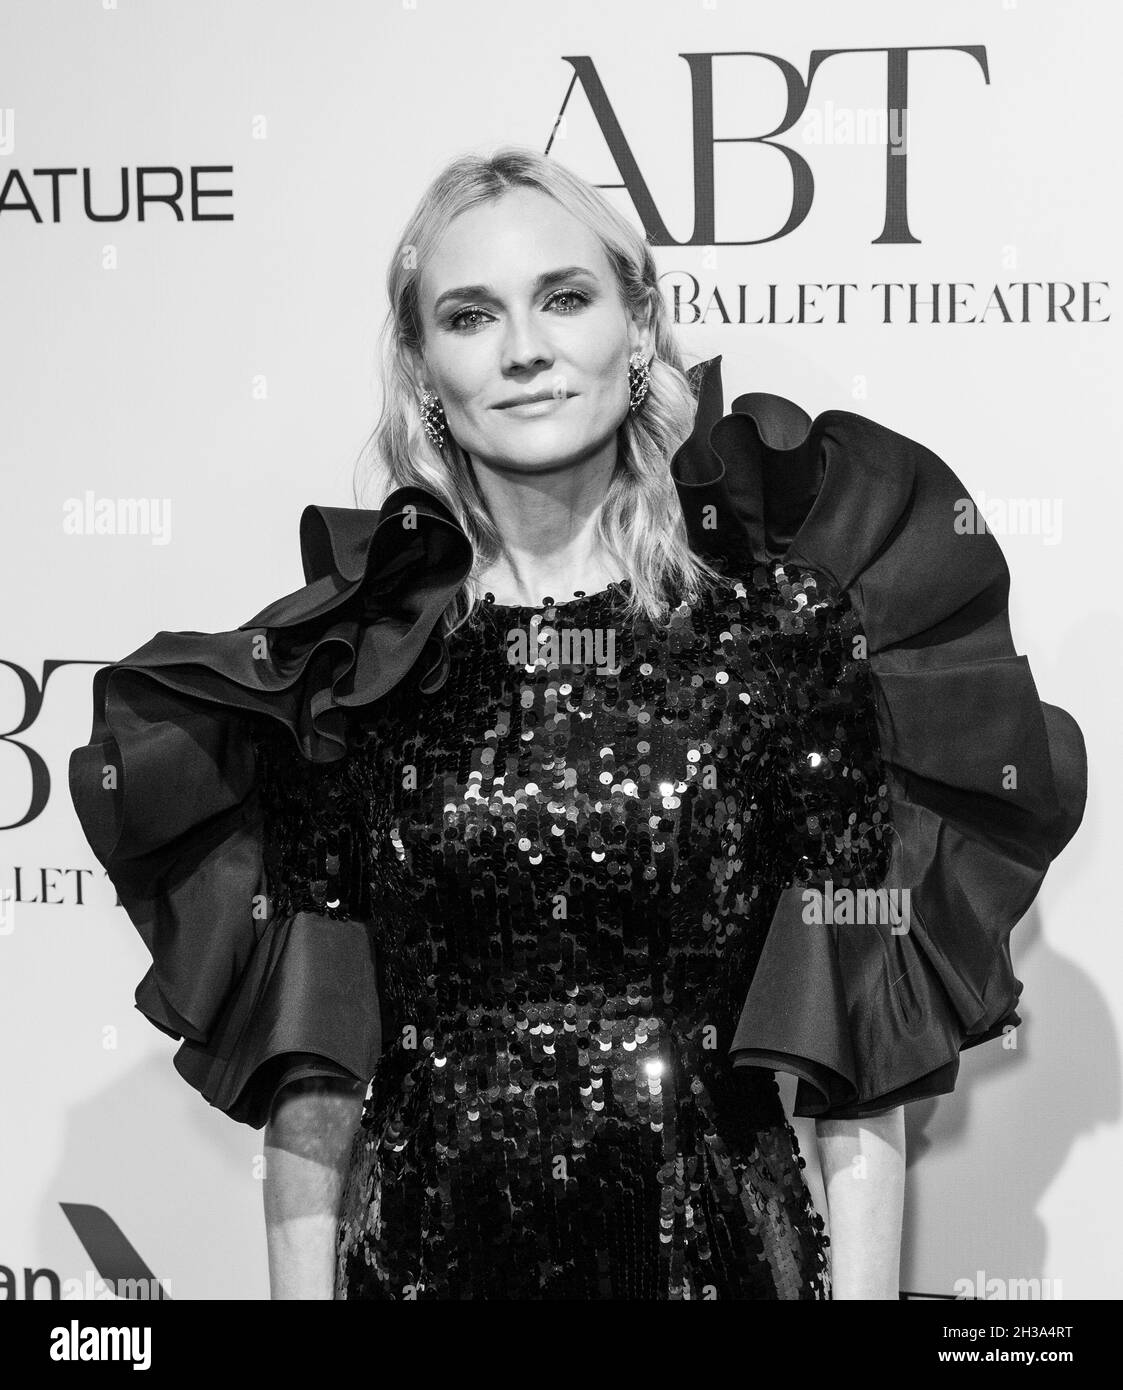 New York, NY - October 26, 2021: Diane Kruger wearing dress by Wes Gordon for Carolina Herrera attends American Ballet Theatre’s Fall Gala at David Koch Theater at Lincoln Center Stock Photo